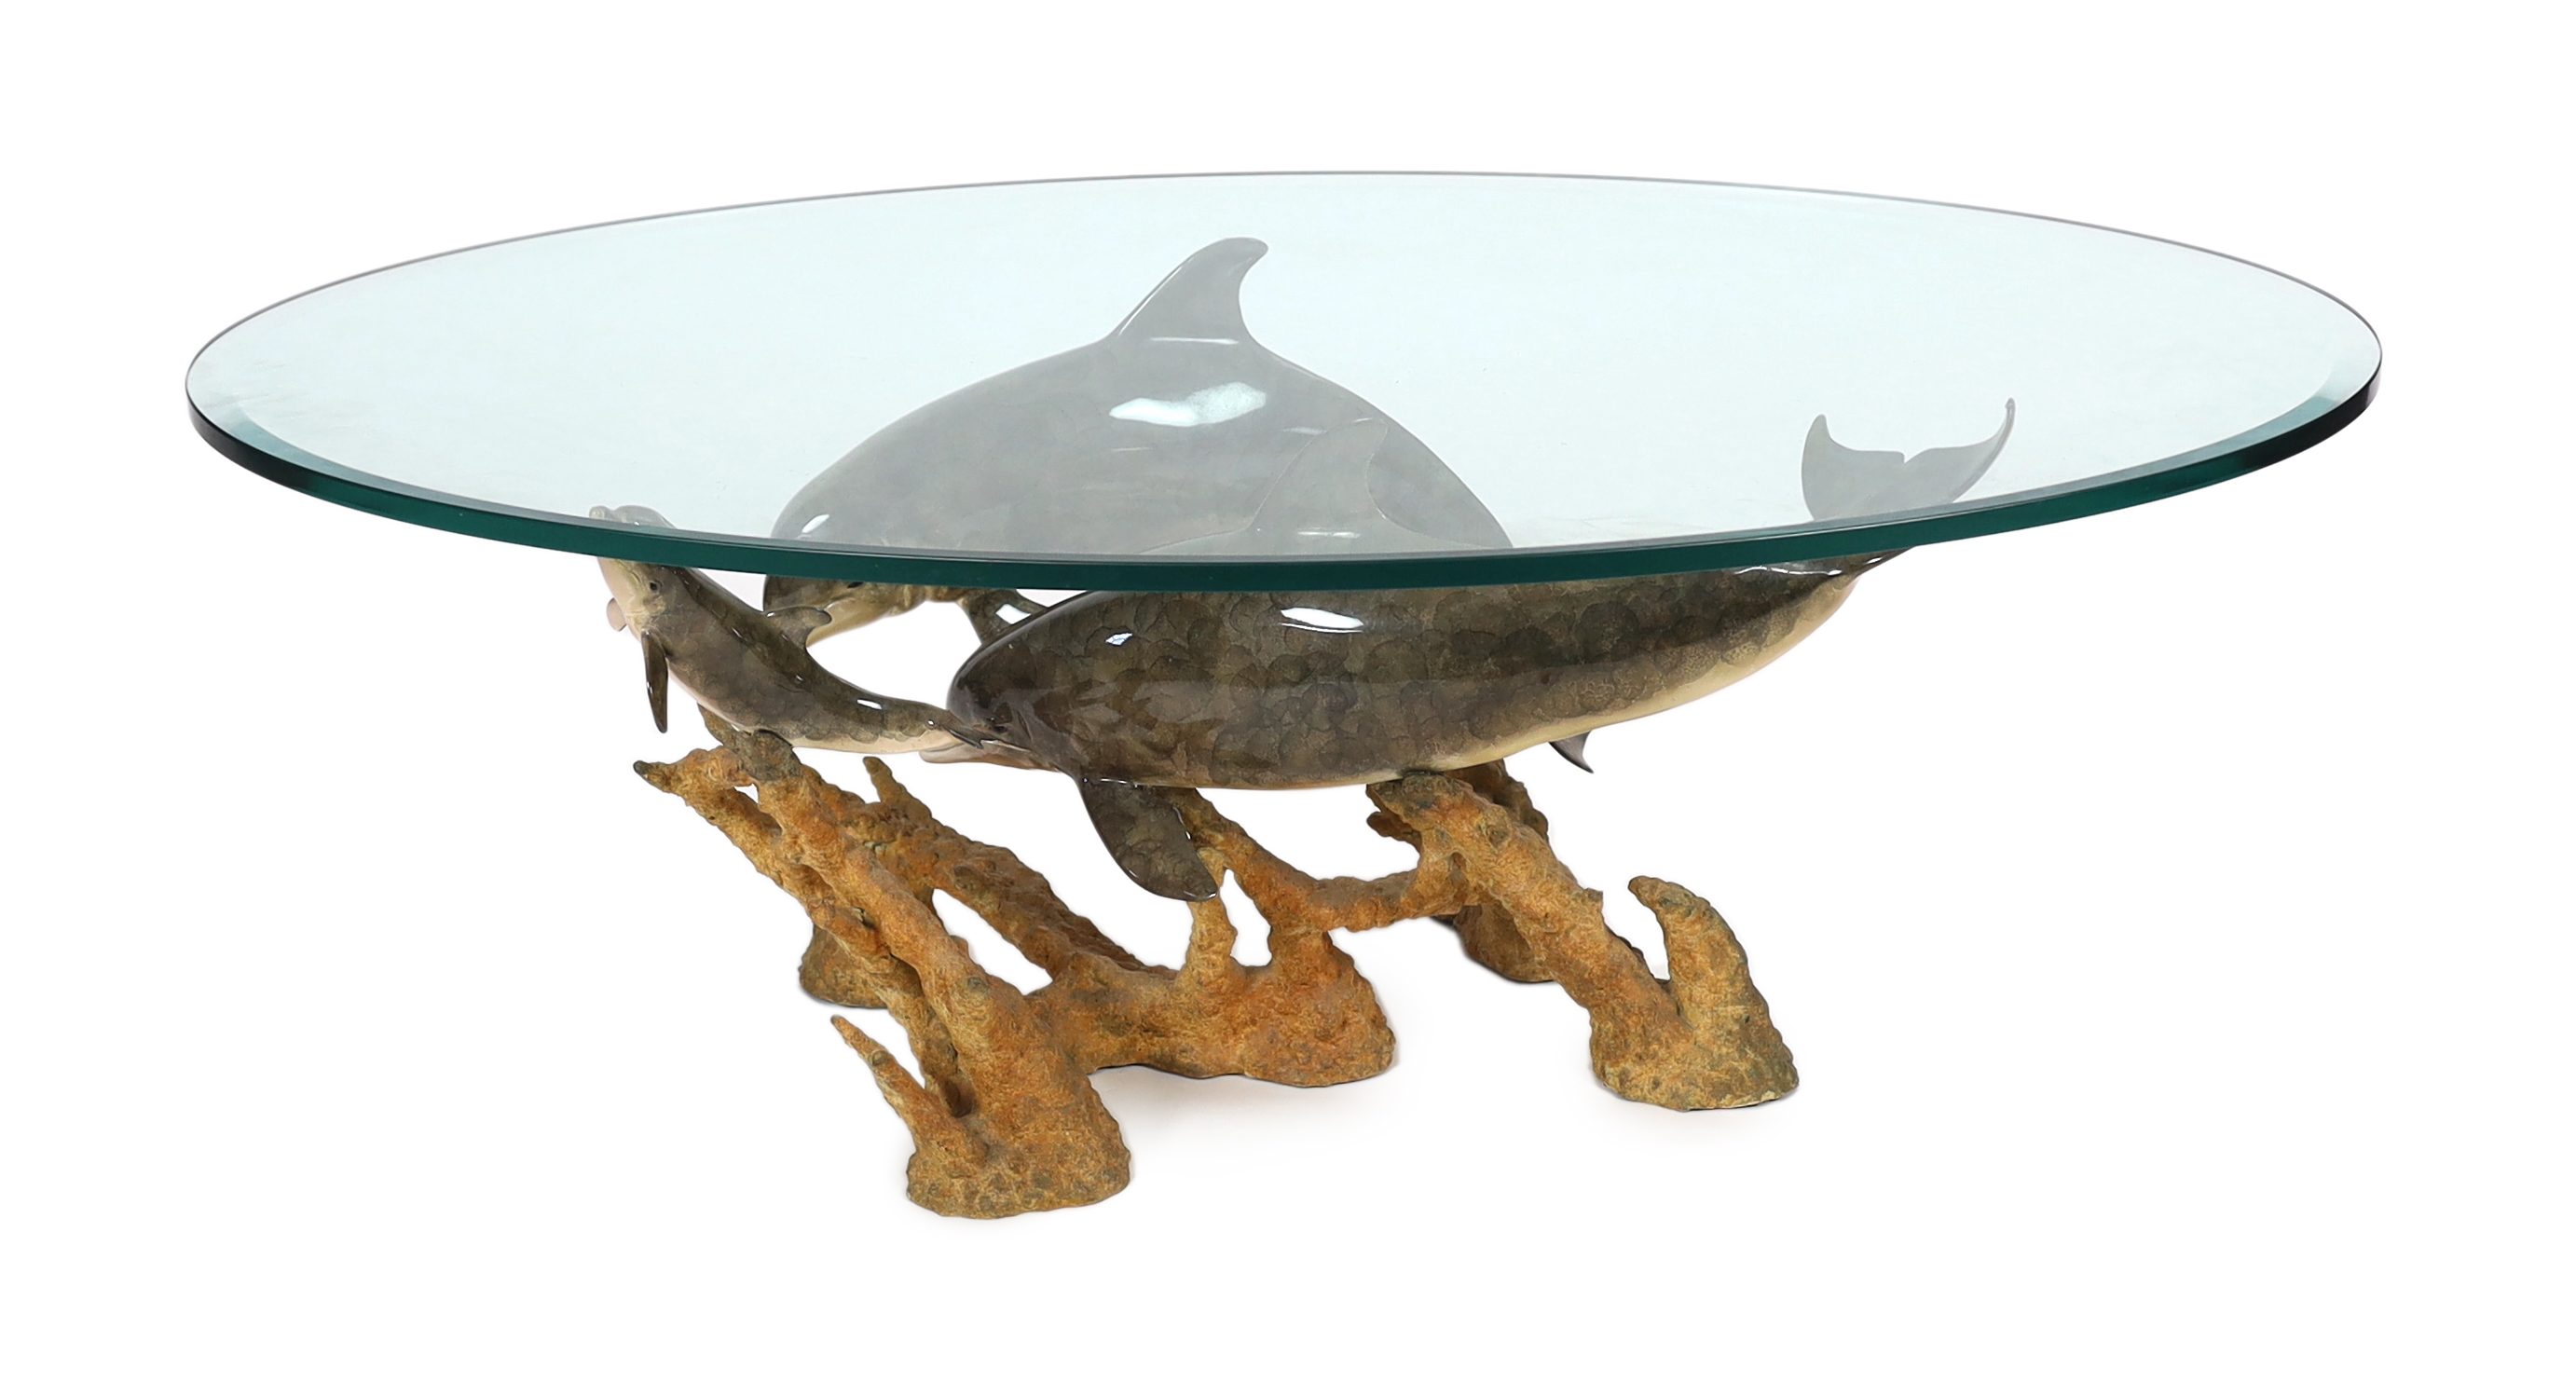 Robert Wyland (American, b.1956), a patinated bronze group 'Dolphin Reef', 81cm long, 53cm deep, 45.5cm high, comes with a plate glass oval top, 130 x 81cm                                                                 